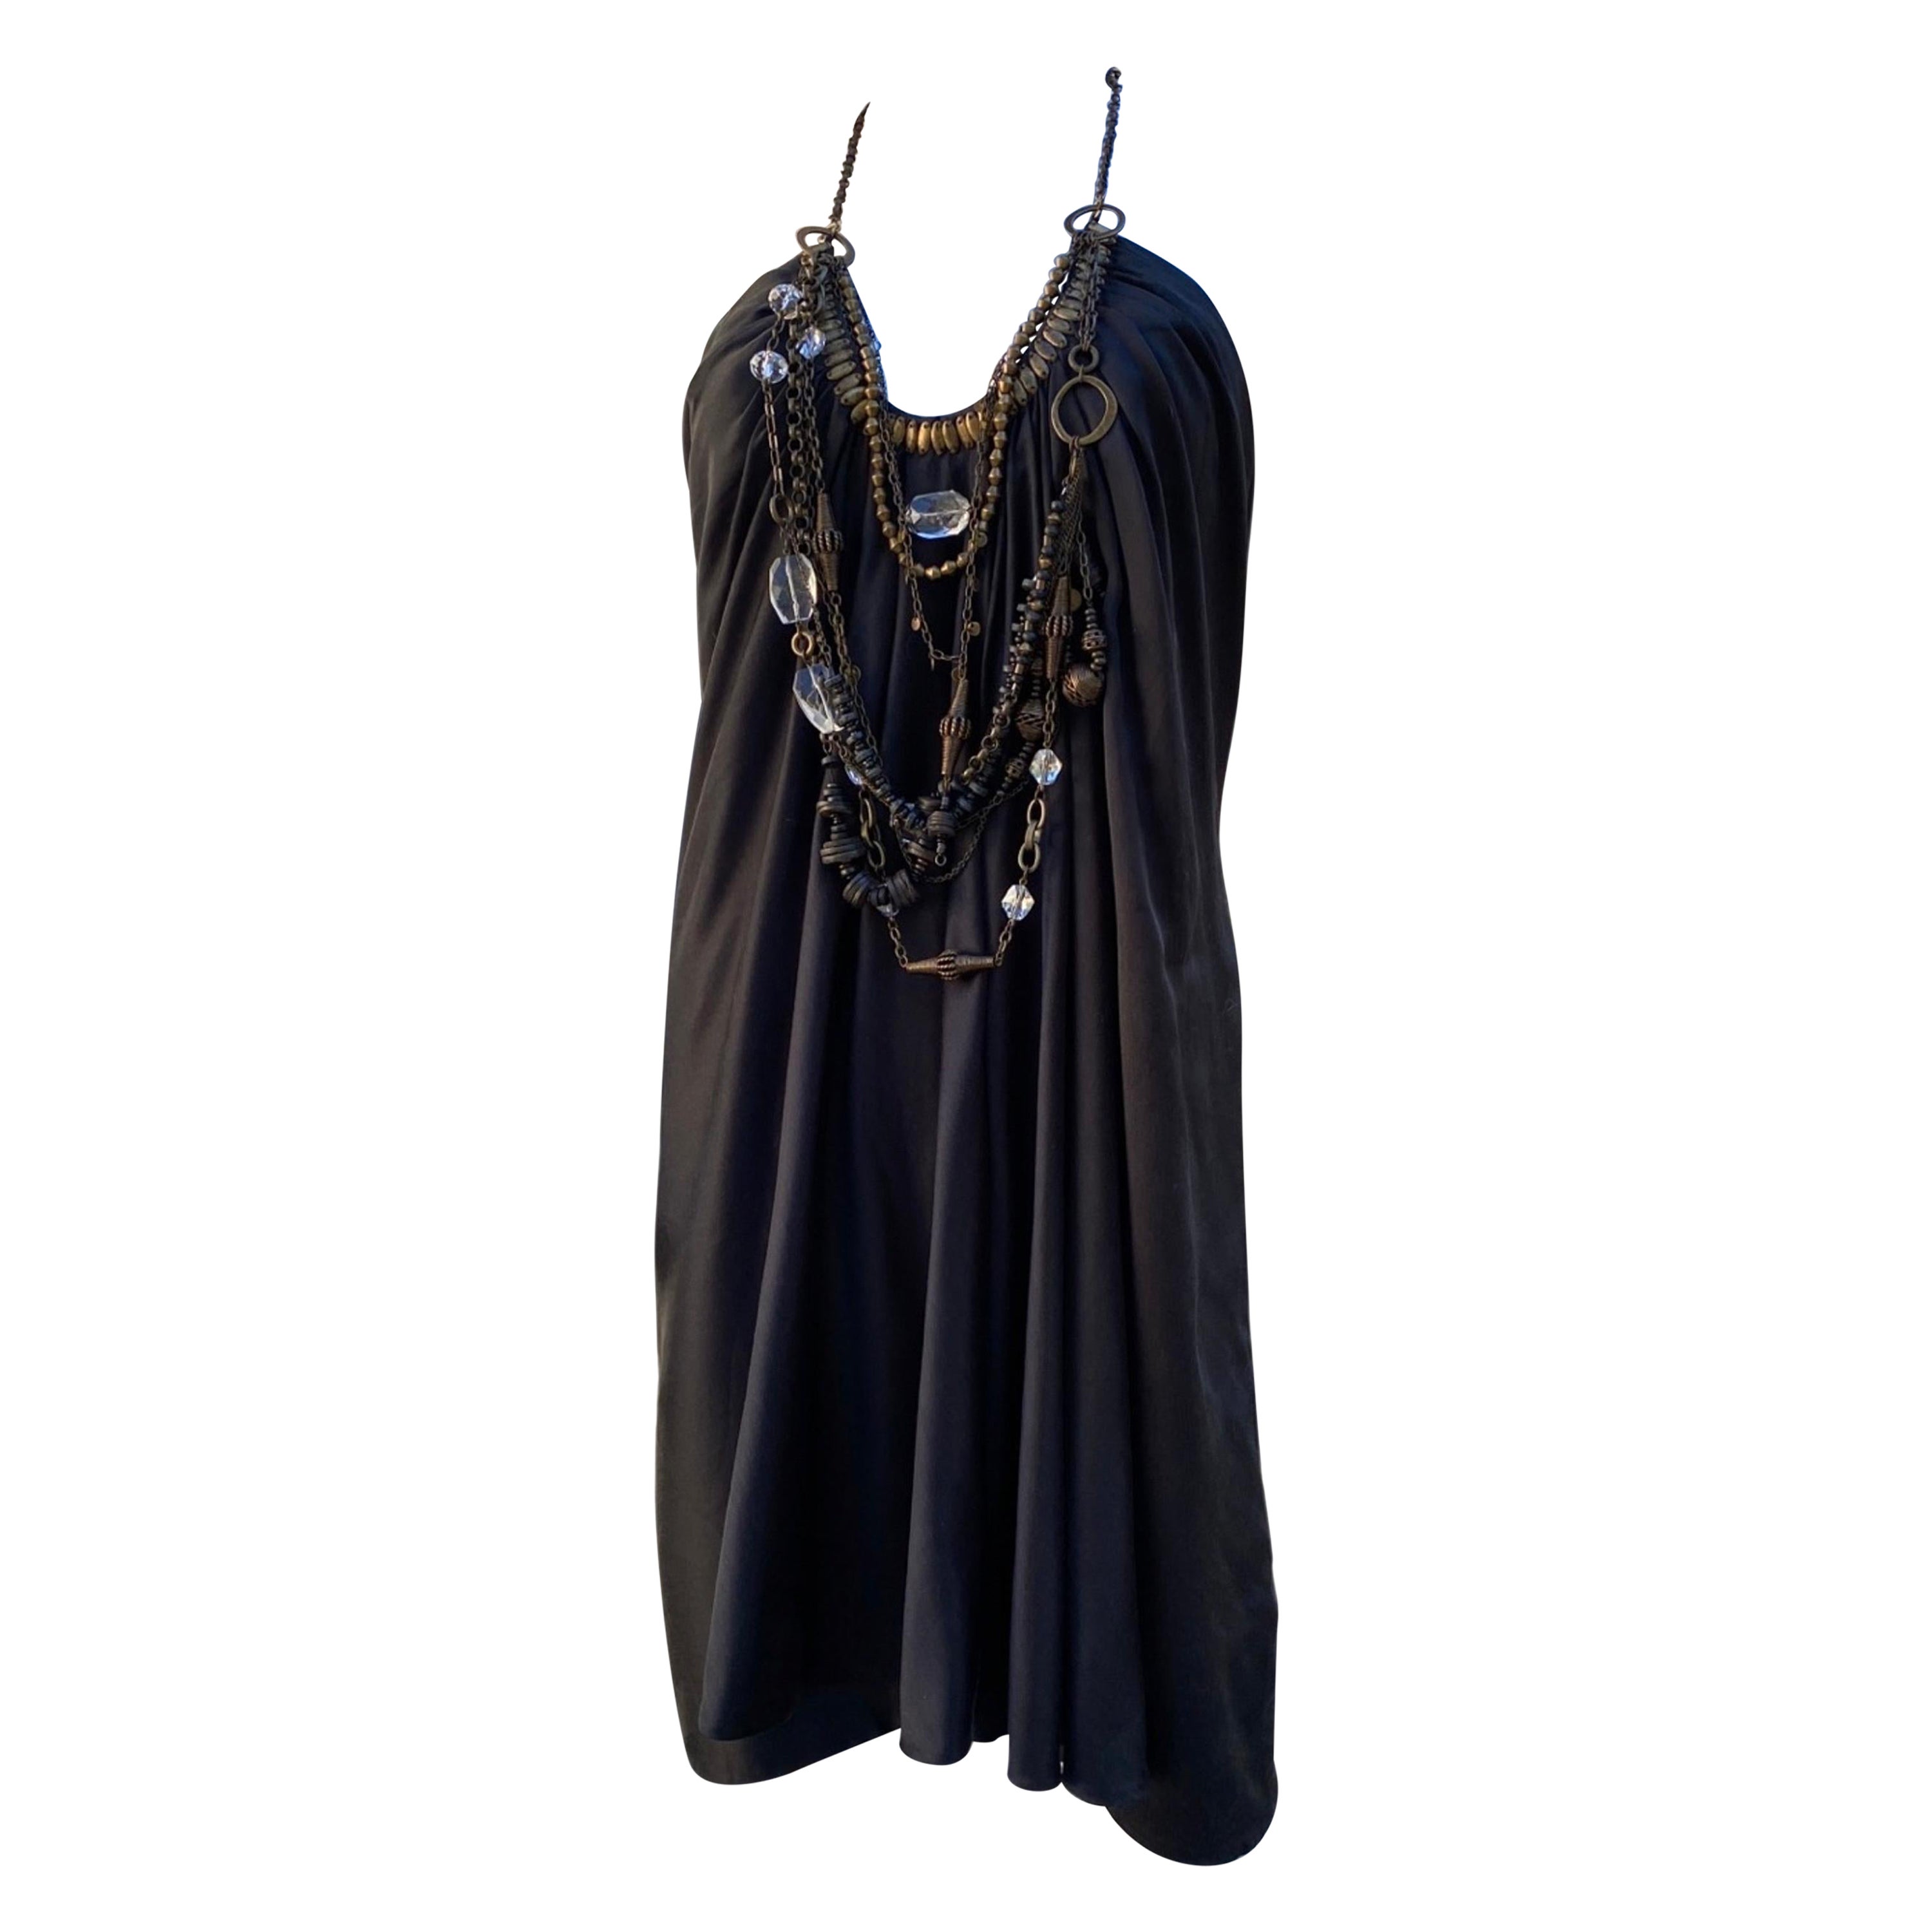 This dress is one of our favorite listings. The design by KaufmanFranco was loved by the fashion editors worldwide. The dress itself is beautiful, draped front black silk with hand beaded gold metal detail. What transcends the dress to spectacular